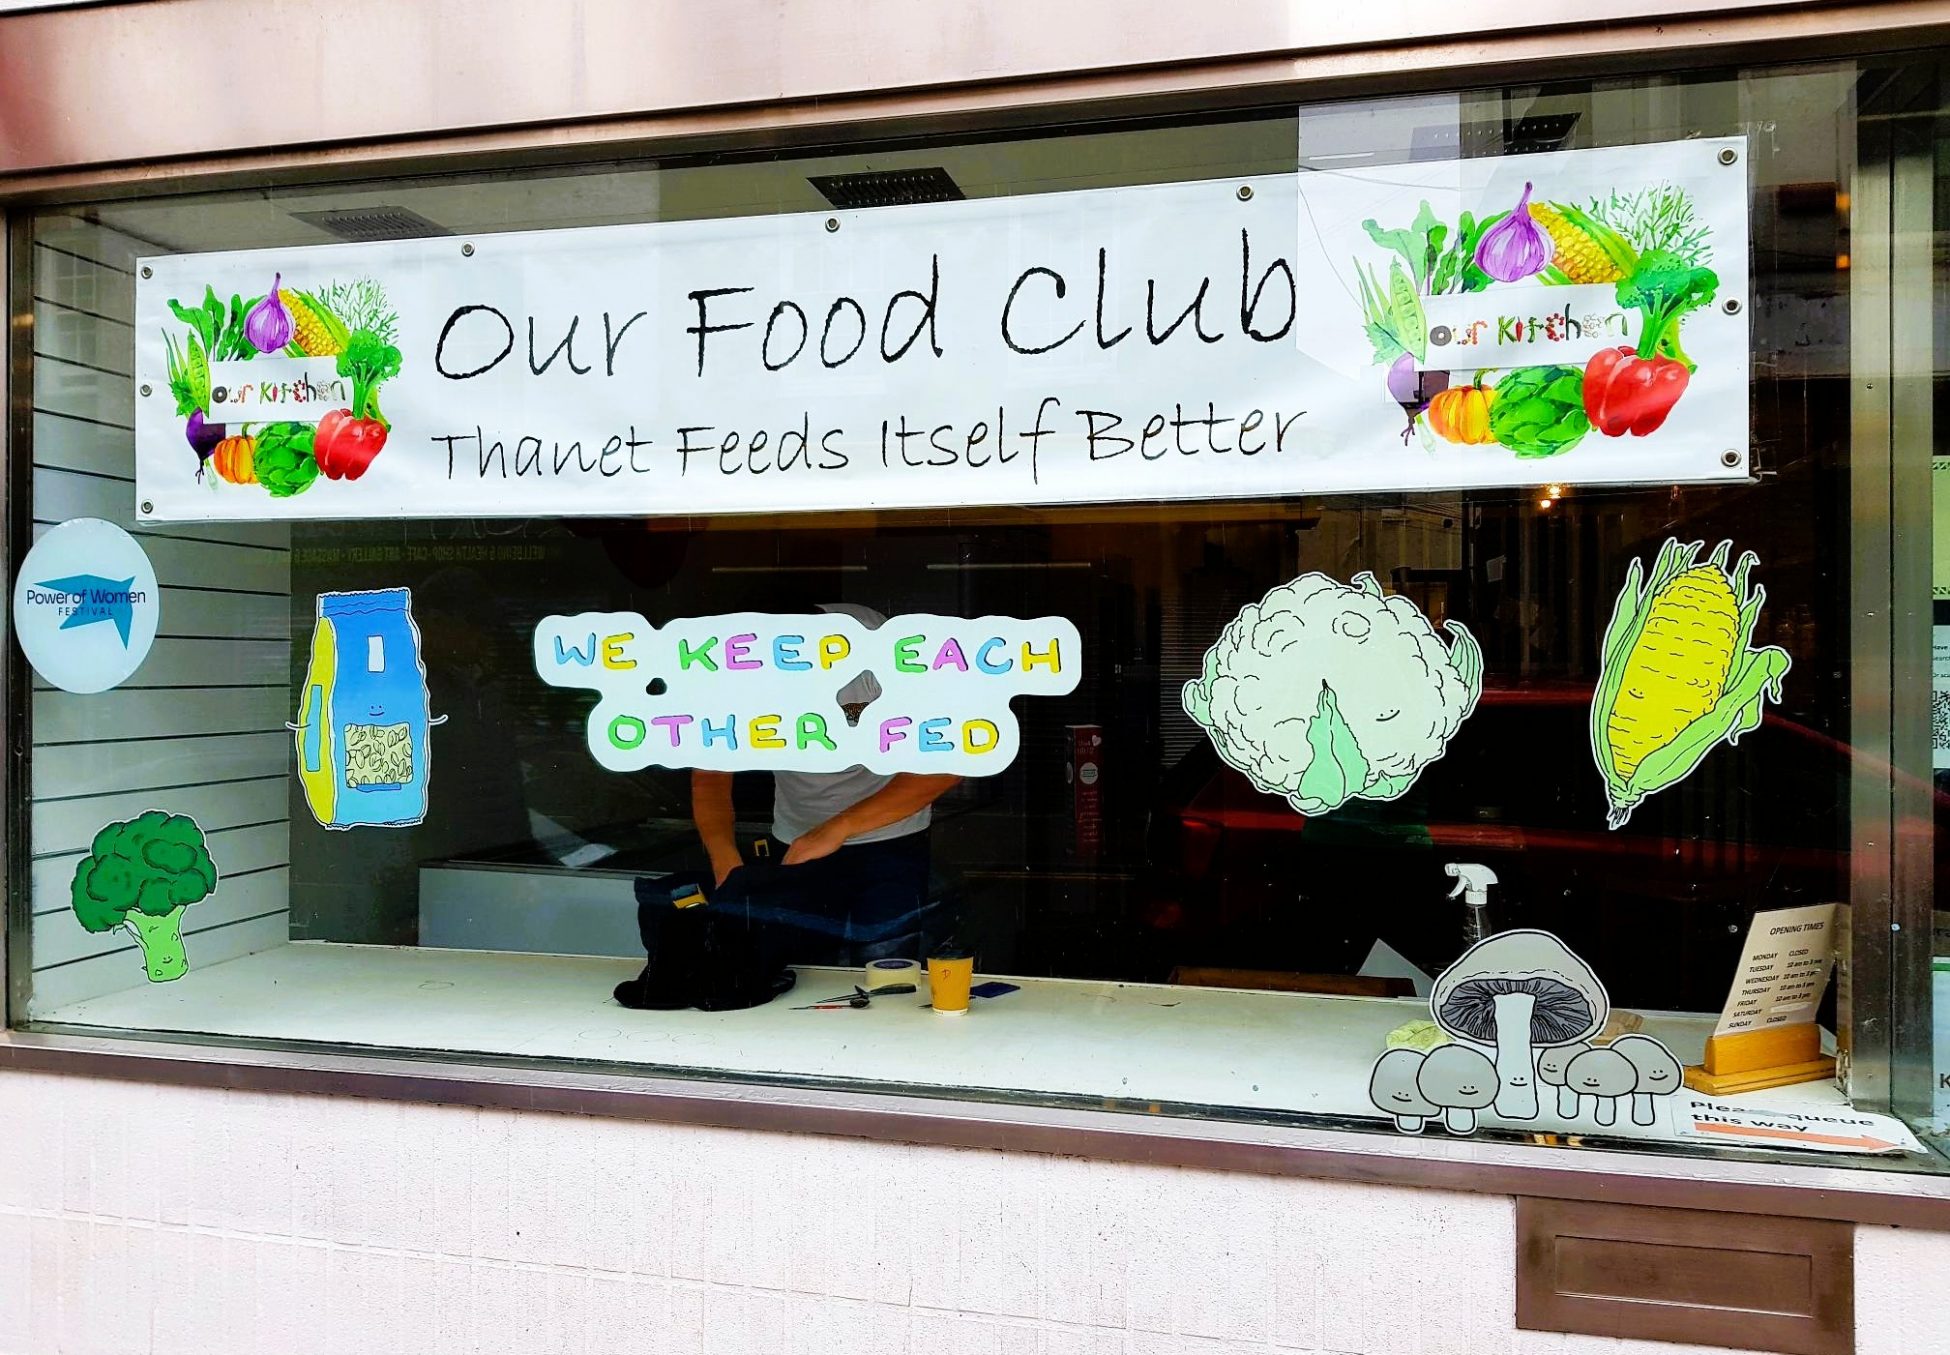 Photo of a shop unit front window, with a large banner reading 